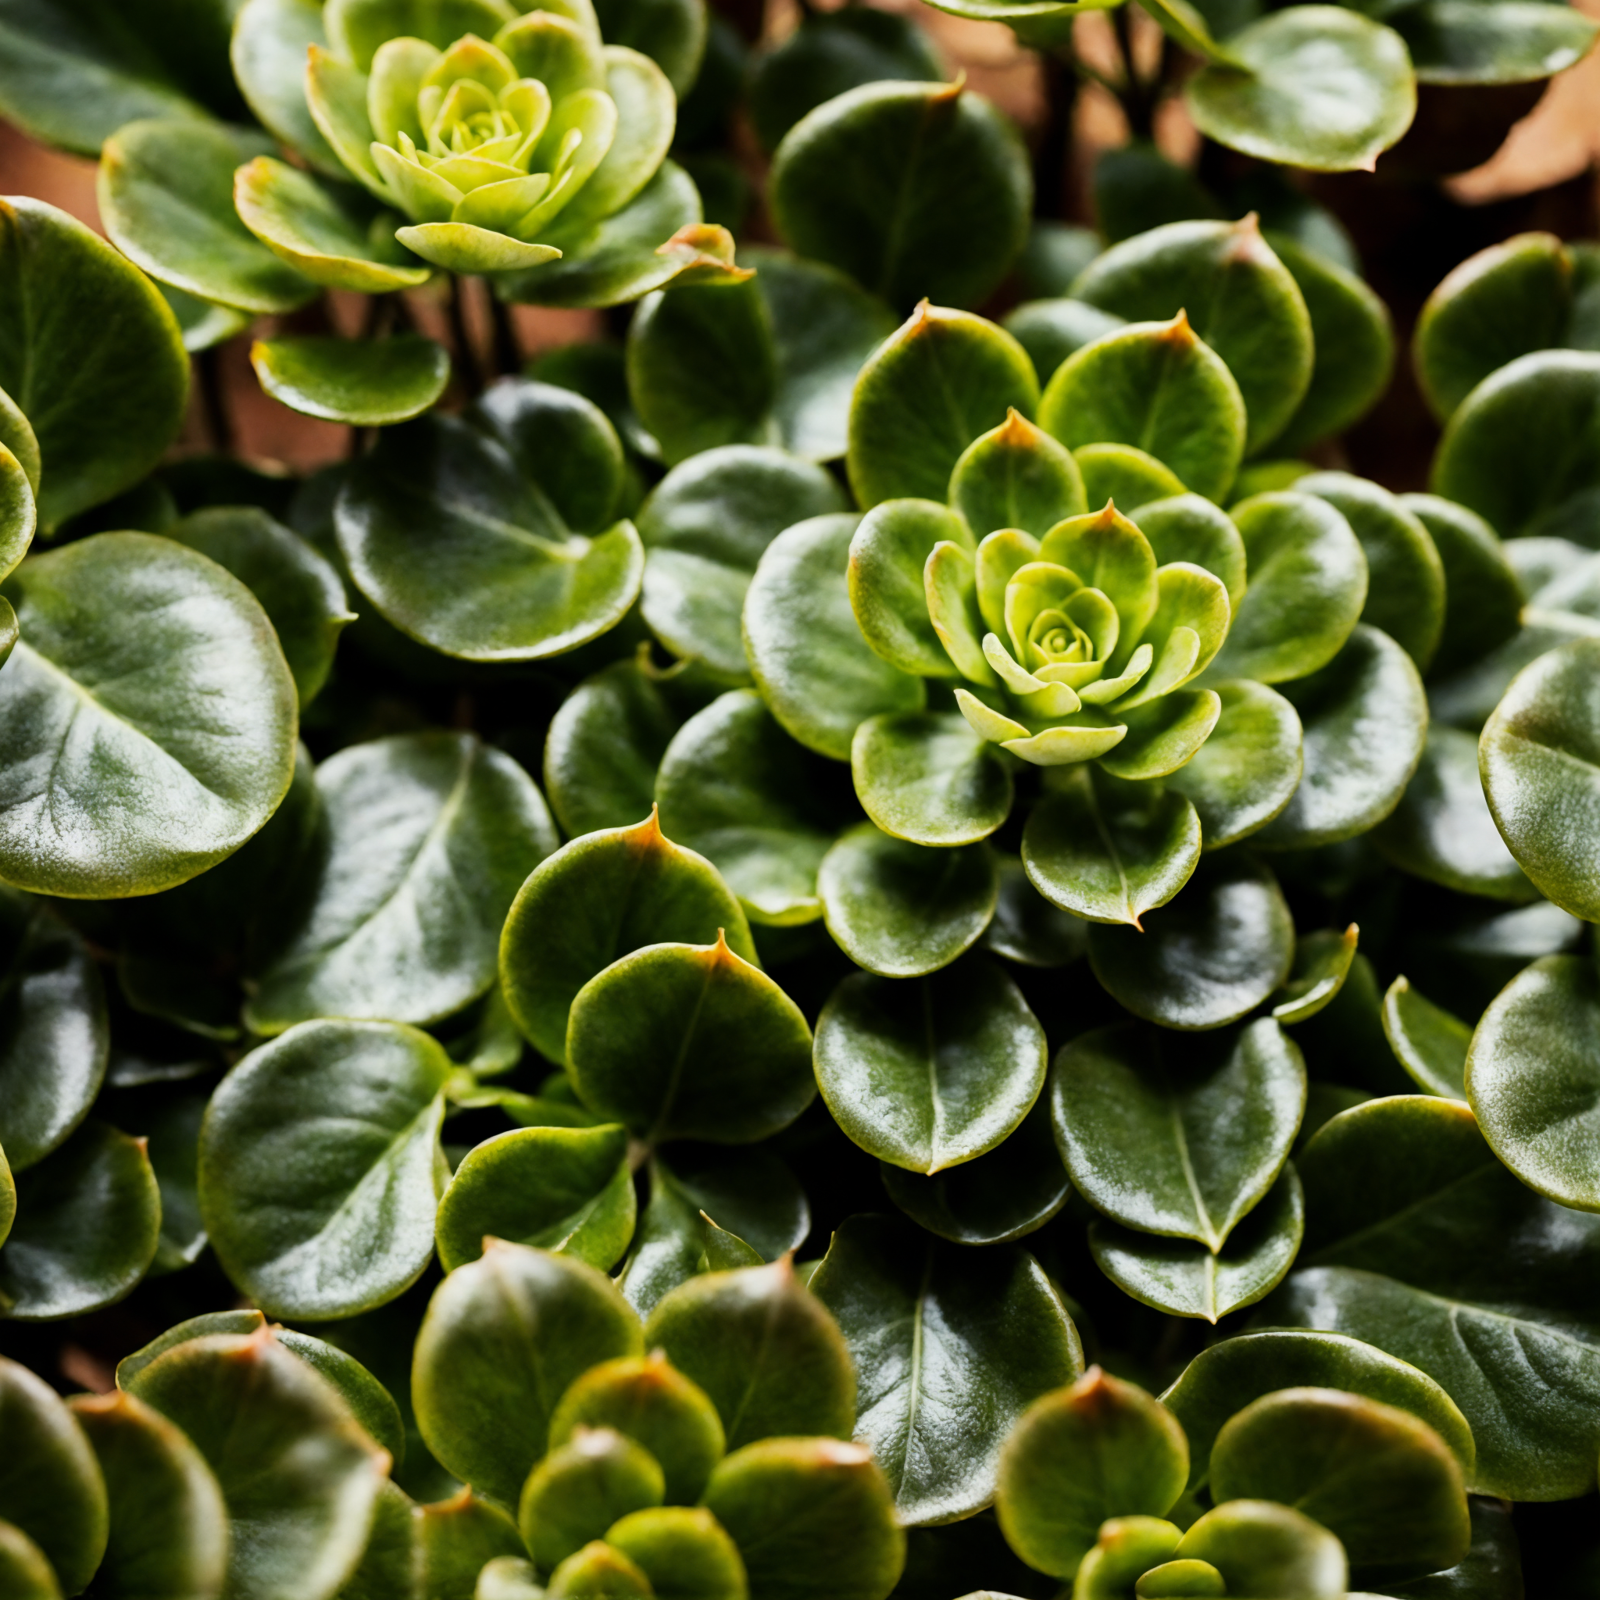 Sedum makinoi with lush green leaves in a planter, clear lighting, against a dark background.